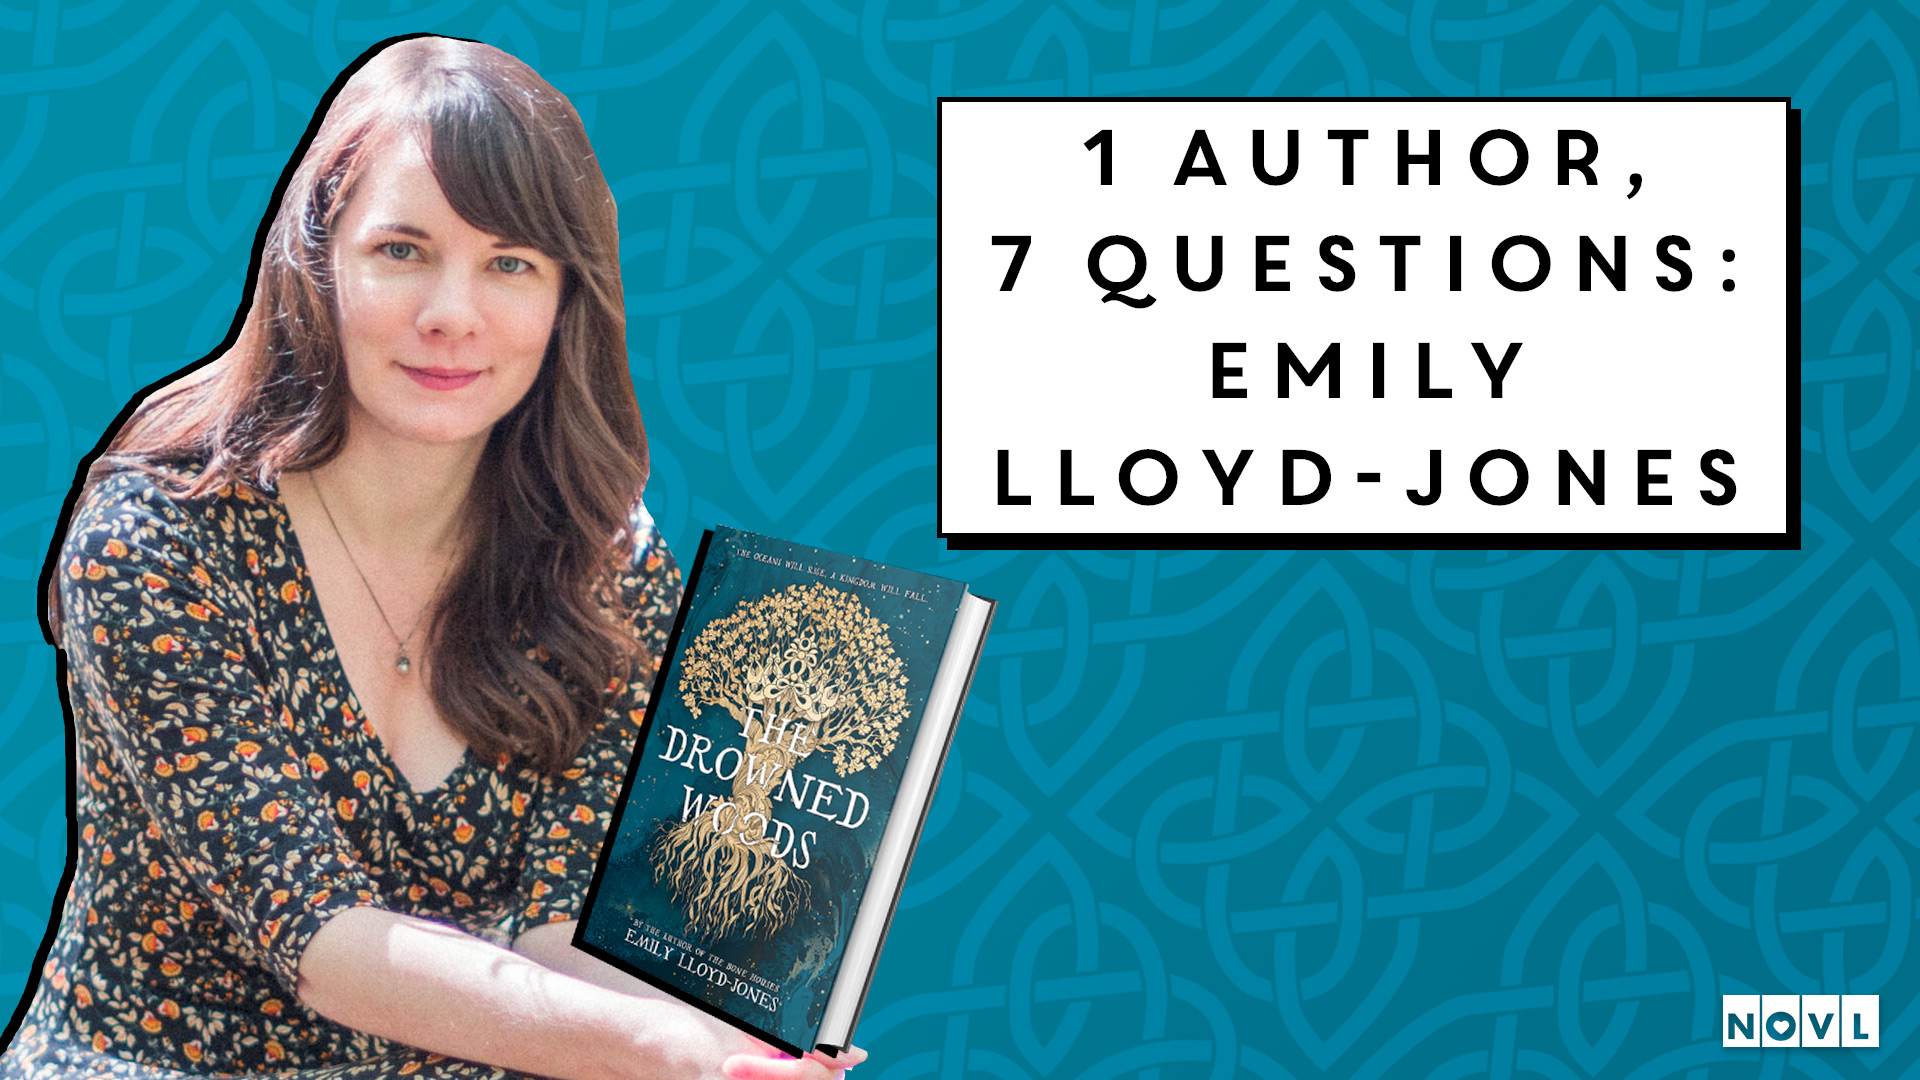 The NOVL Blog, Featured Image for Article: 1 Author, 7 Questions: Emily Lloyd-Jones